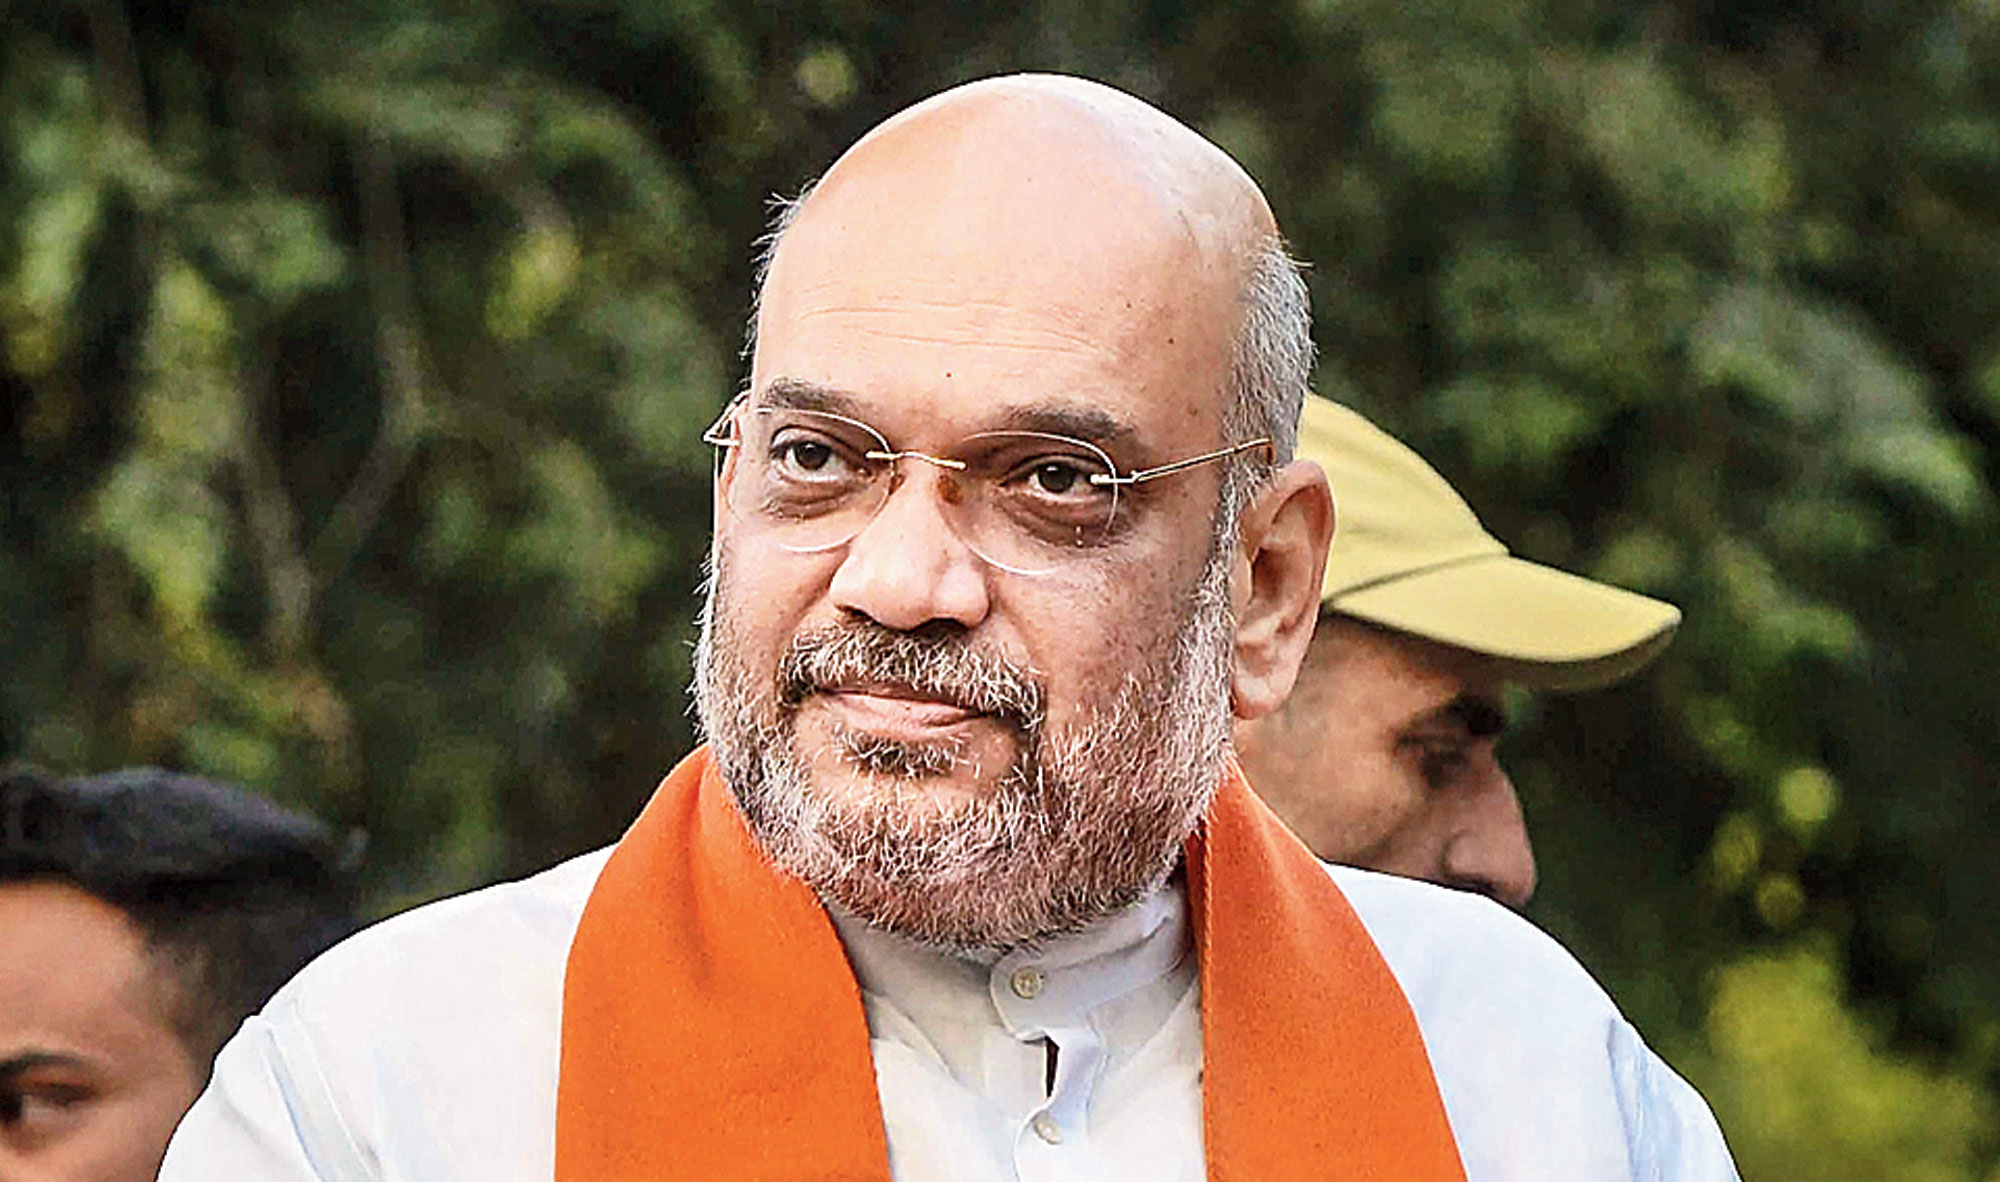 Amit Shah apprised the leaders of four major political parties of Delhi on the steps taken to check the coronavirus pandemic and sought their views on the issue, a home ministry official said.

